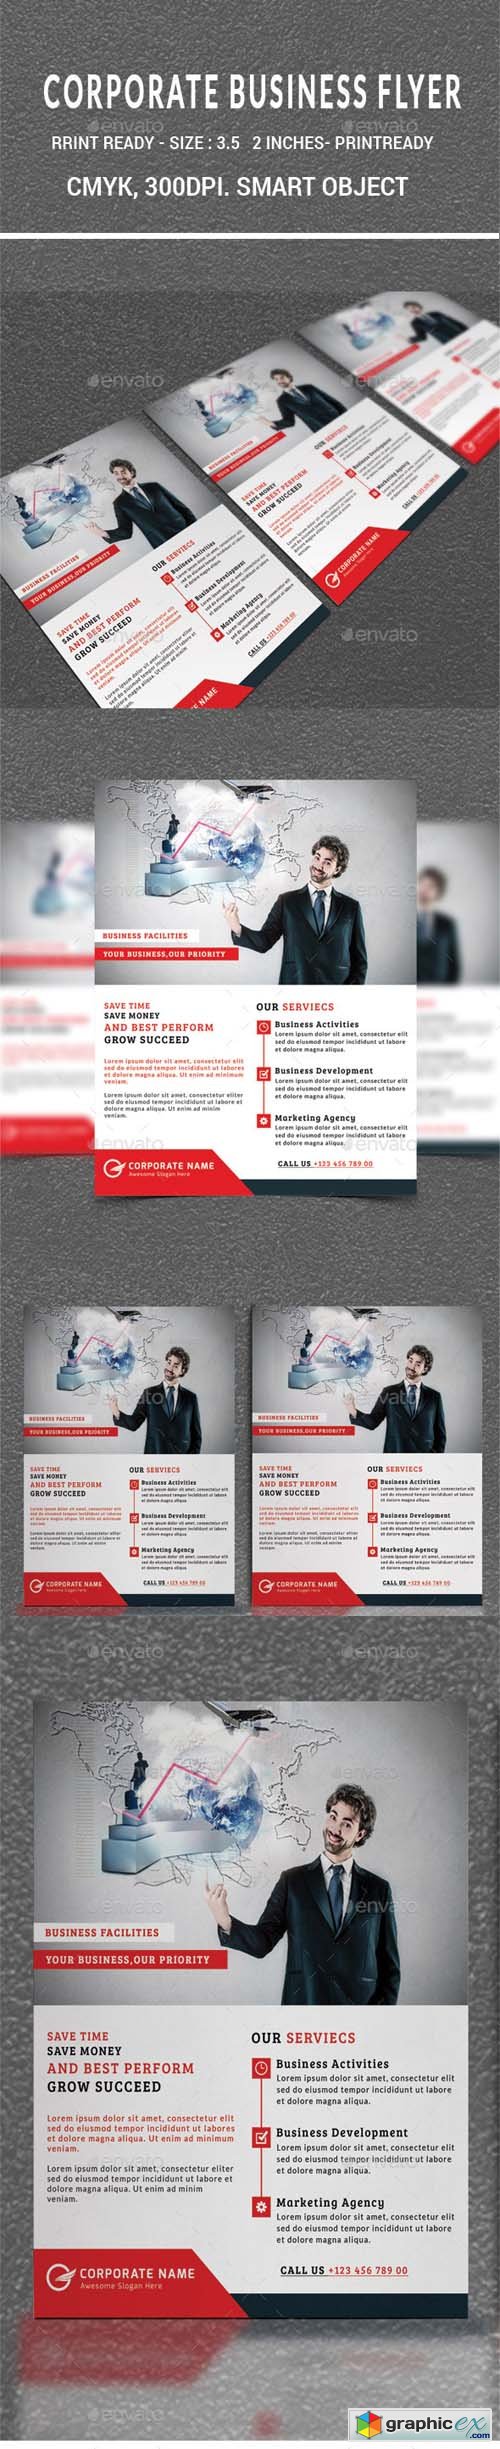 Corporate Business Flyer 9433163